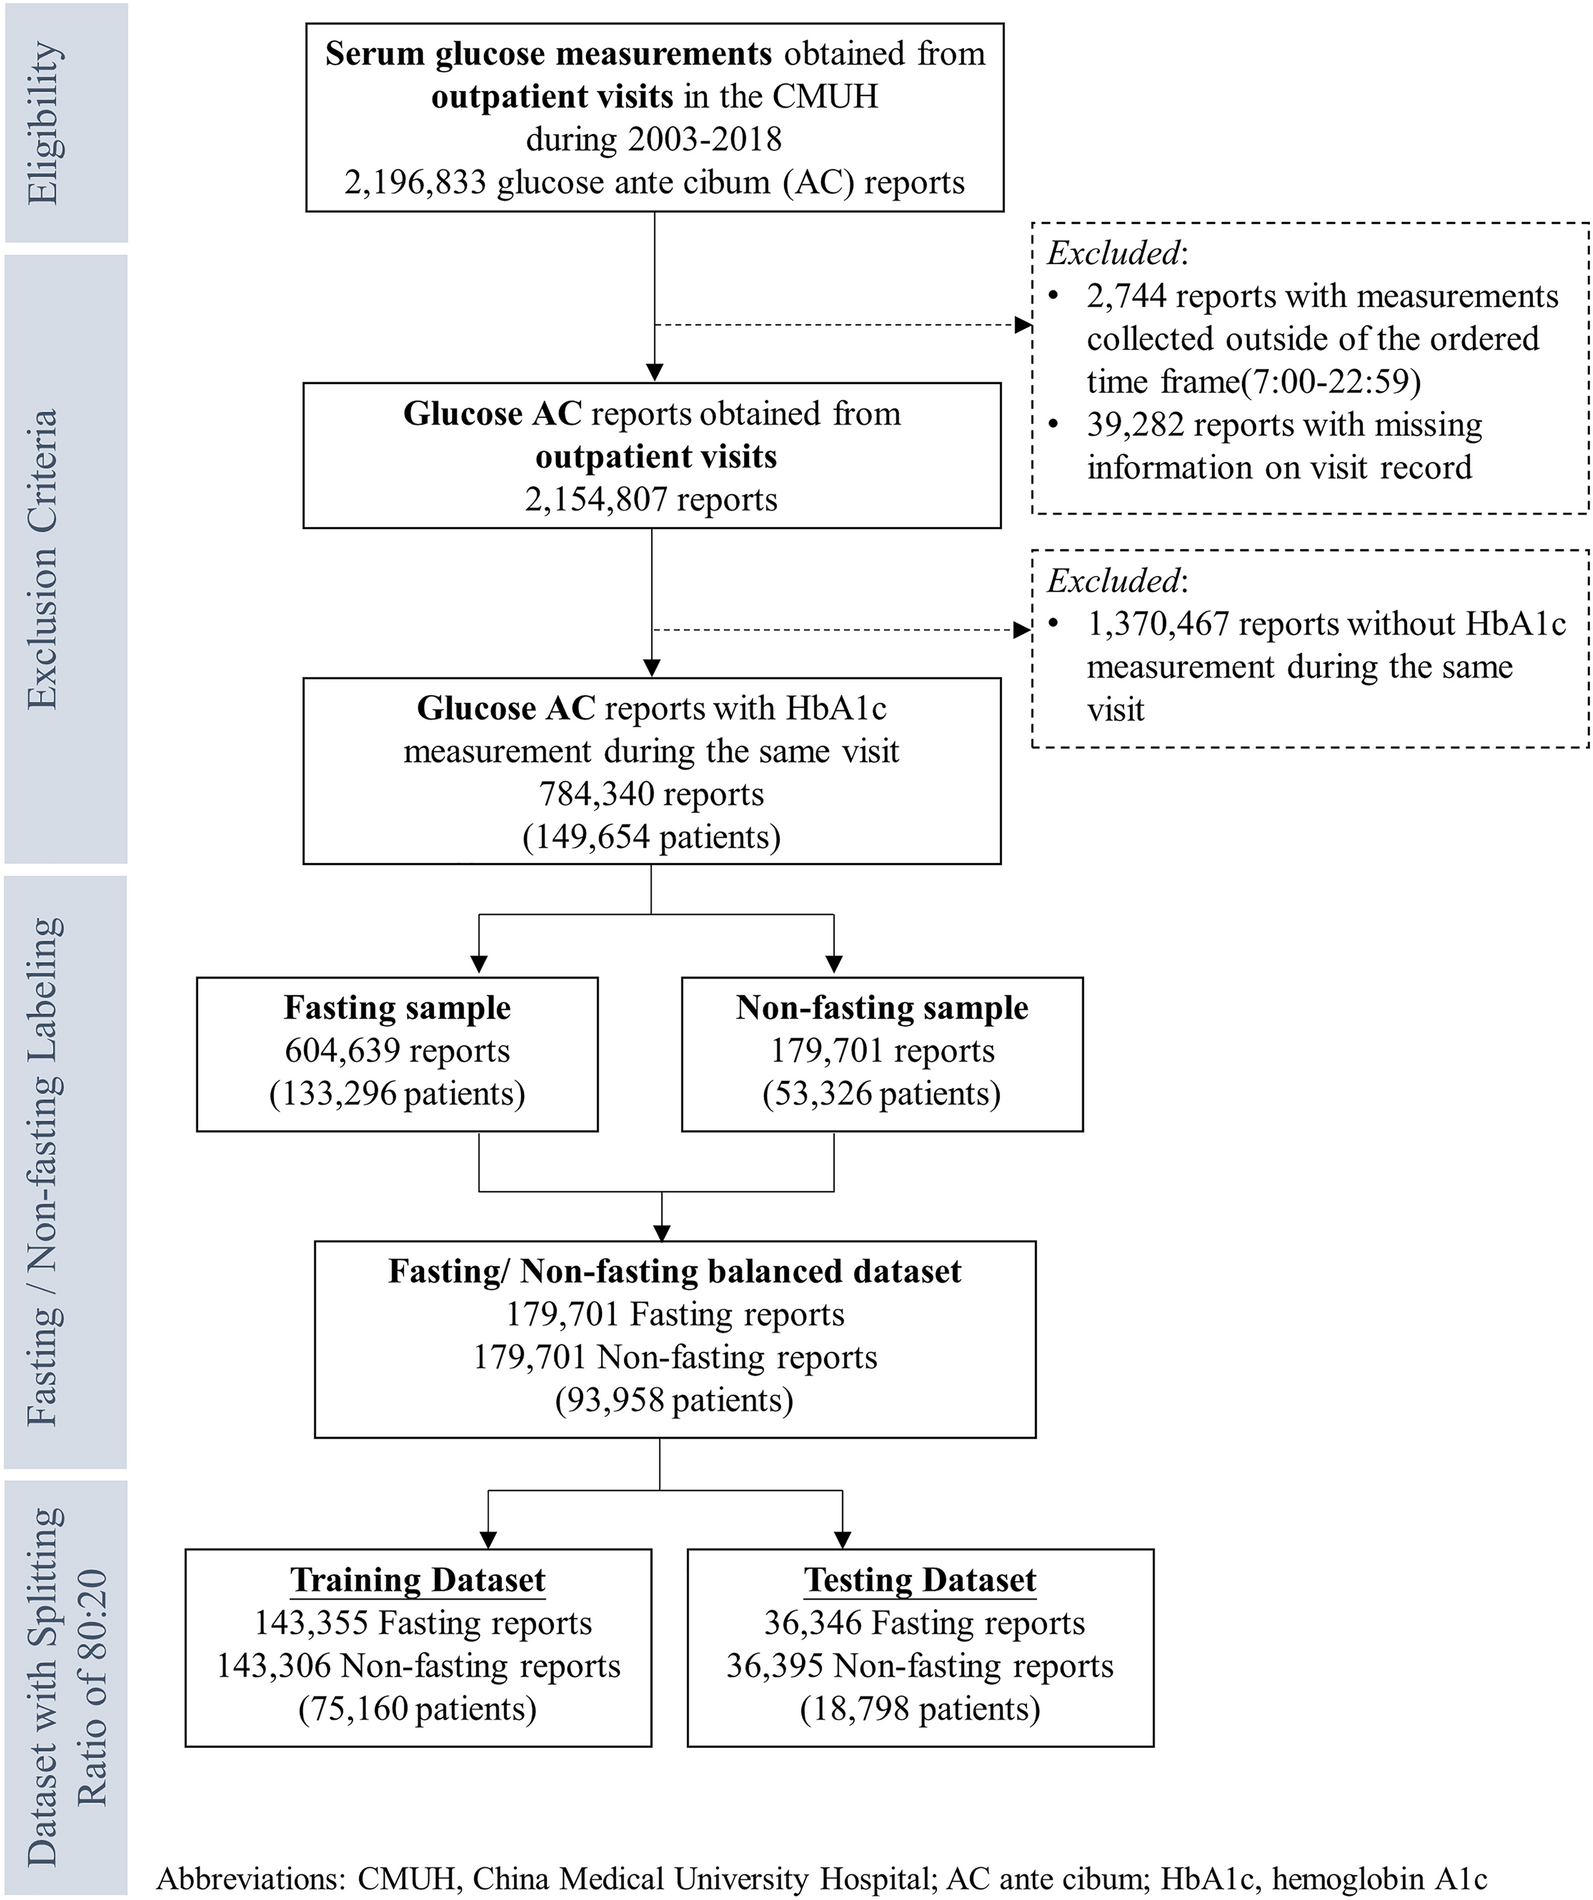 Application of machine learning methods for the prediction of true fasting status in patients performing blood tests Scientific Reports